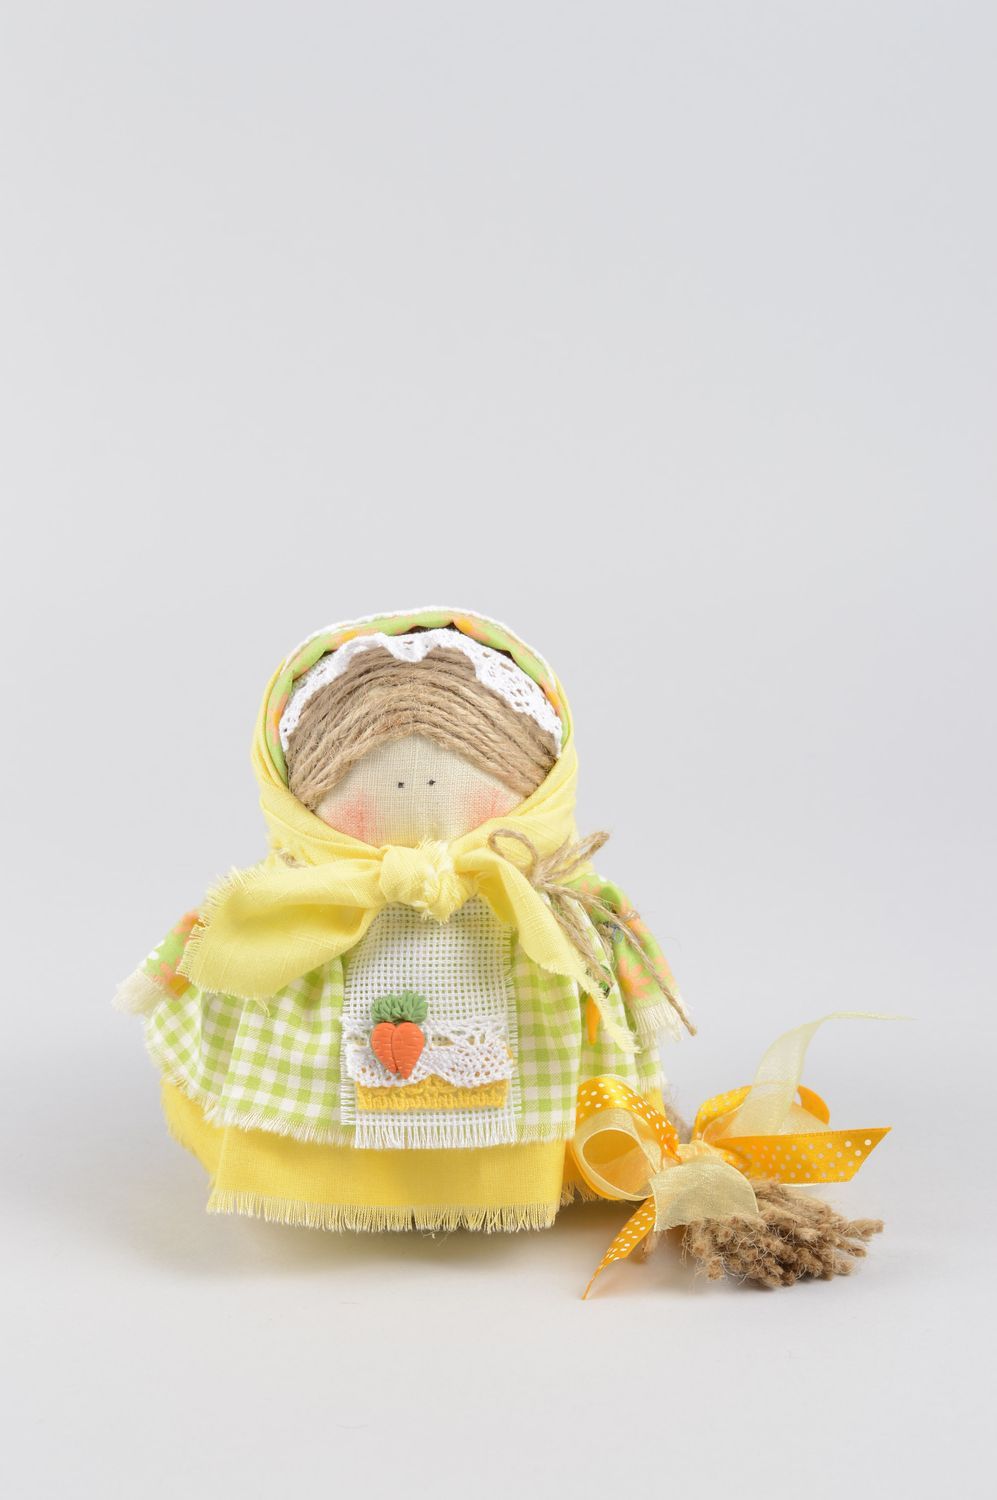 Handmade doll unusual doll decorative use only soft doll for baby gift ideas photo 1